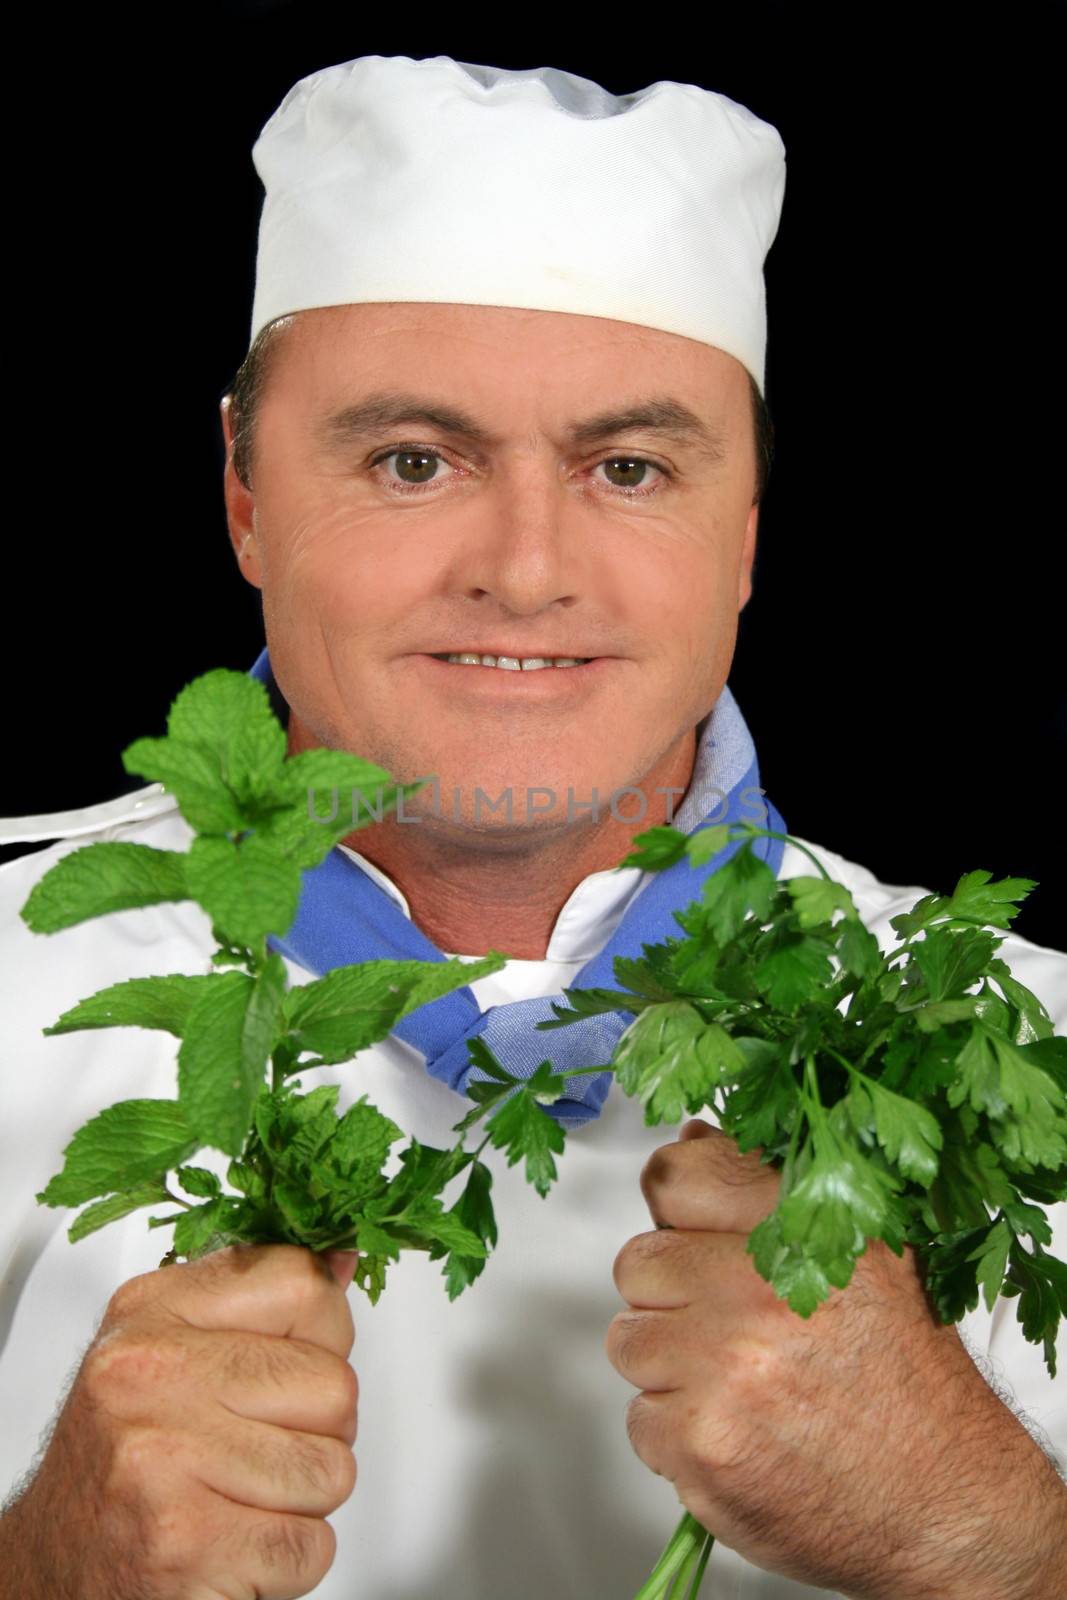 Chef with his fresh herbs ready to prepare.